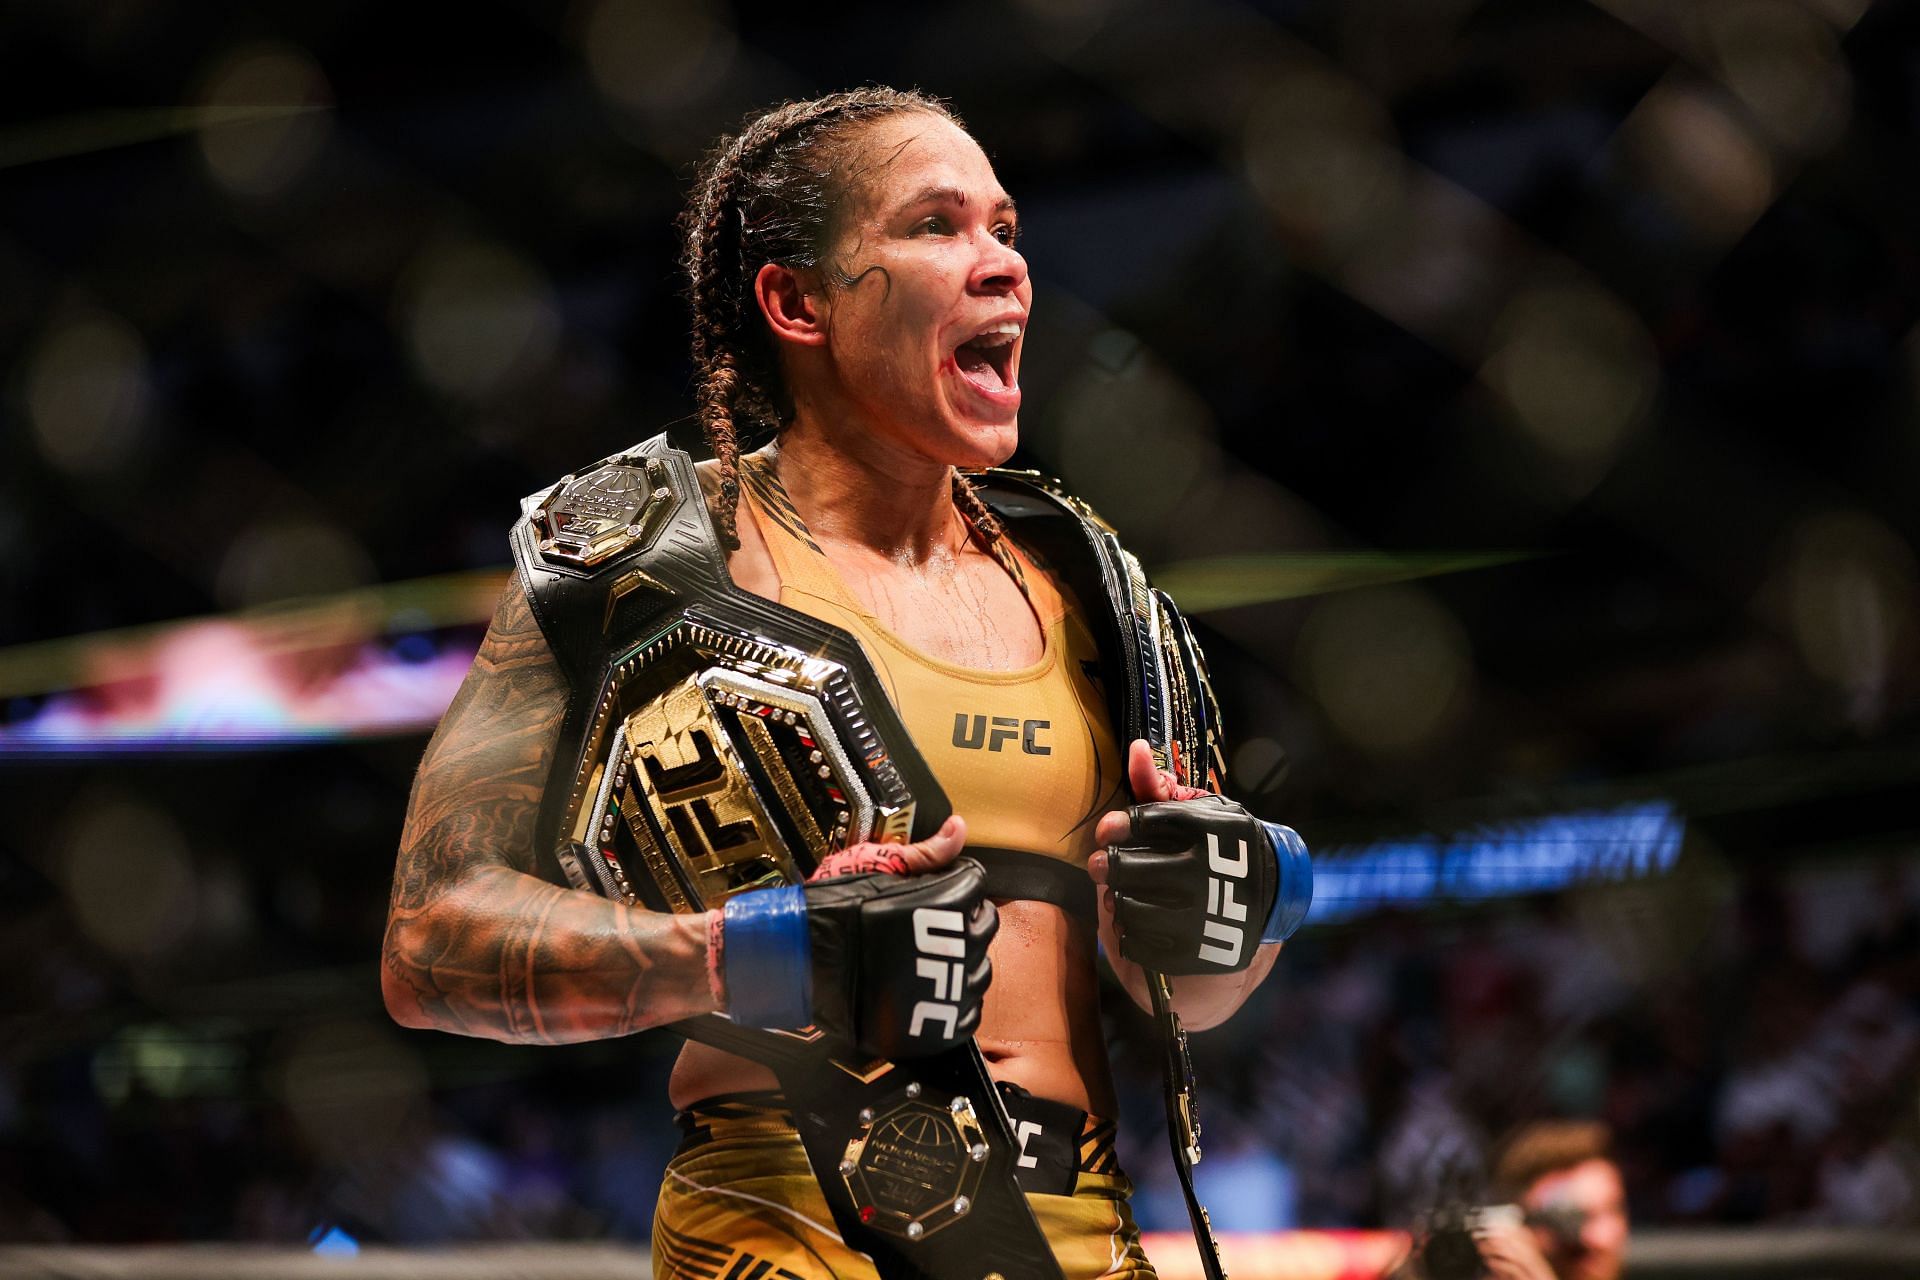 Nunes and Shevchenko have a combined record of 55-8